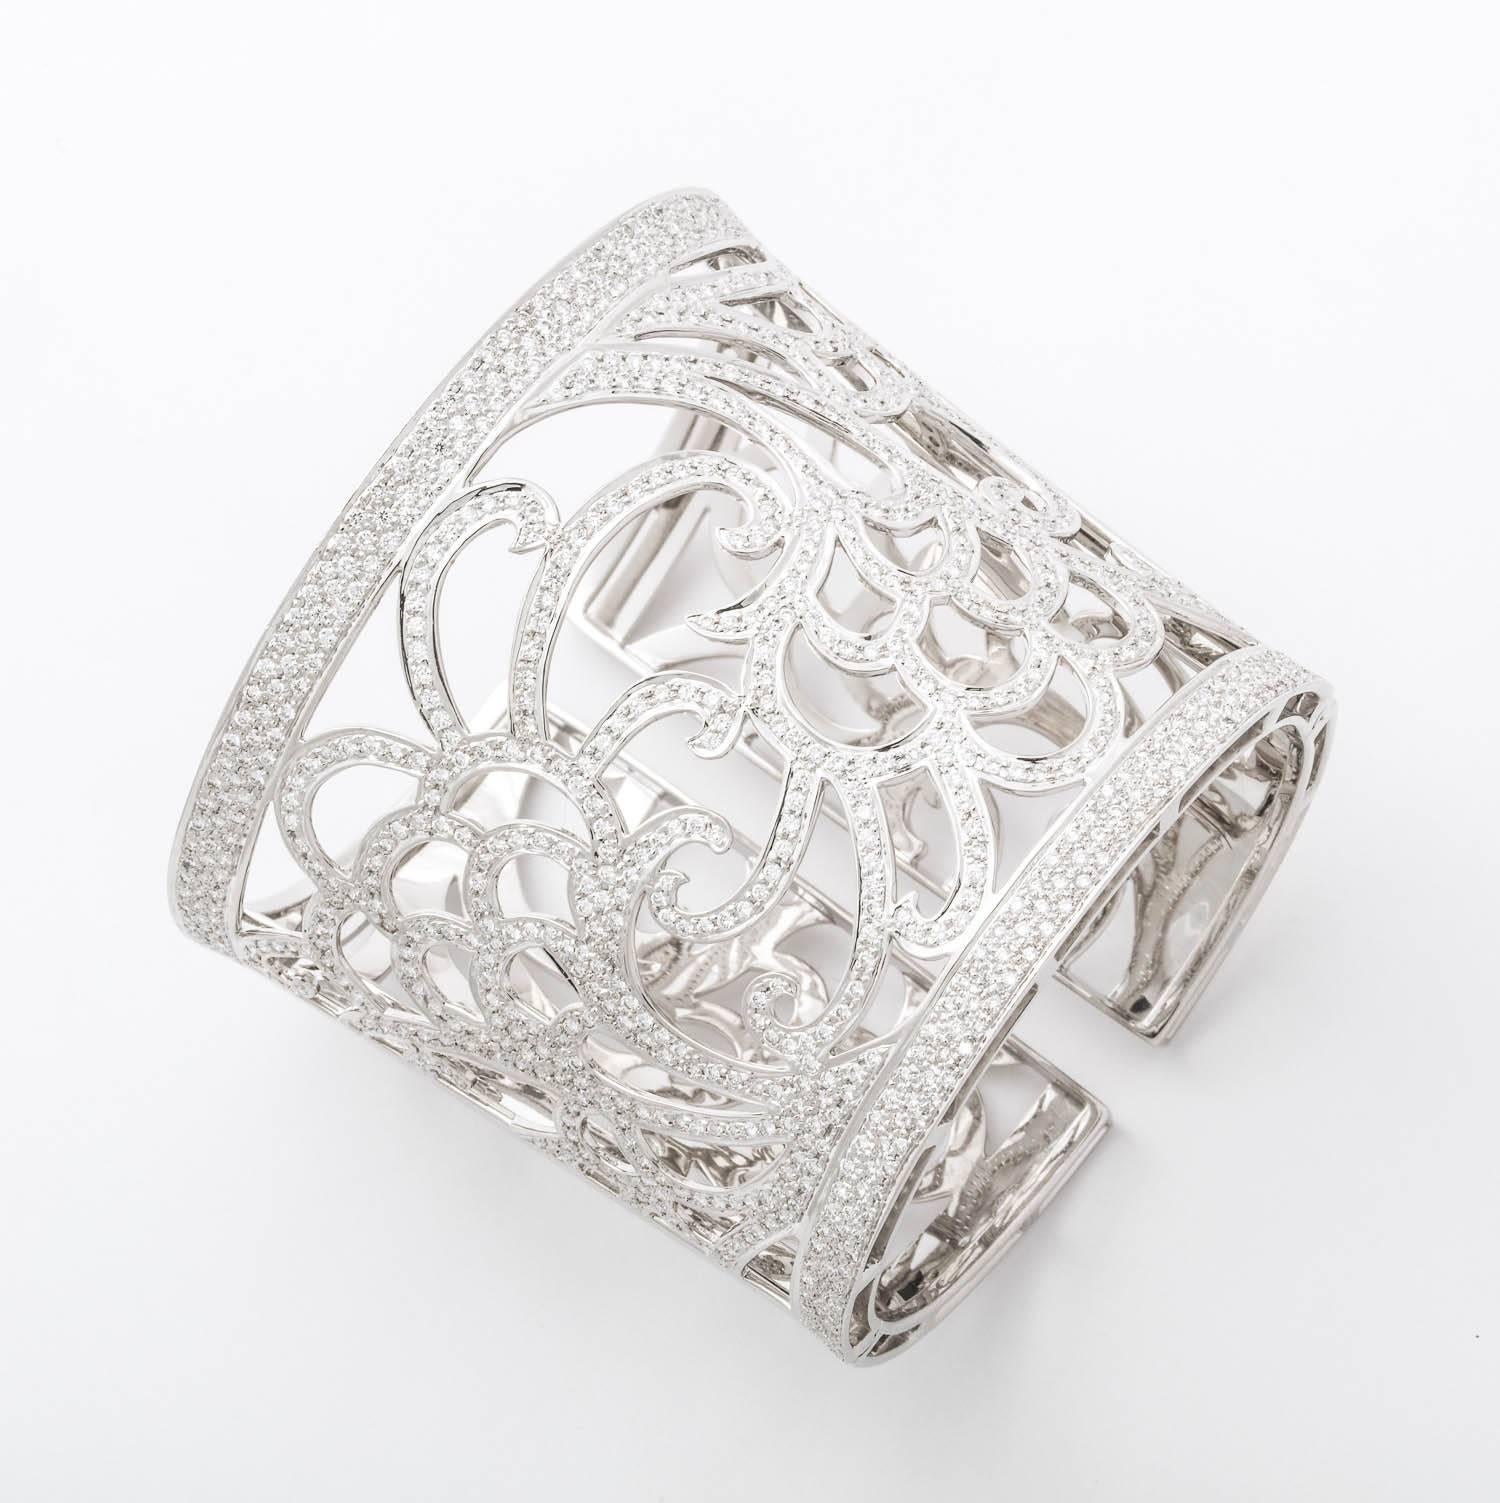 18 Karat white gold and diamond tapered cuff bracelet containing 500 full cut diamonds total weight 7.33 carats.  121.7 grams 18k gold,  Hand pierced and and set in a beautiful floral pattern